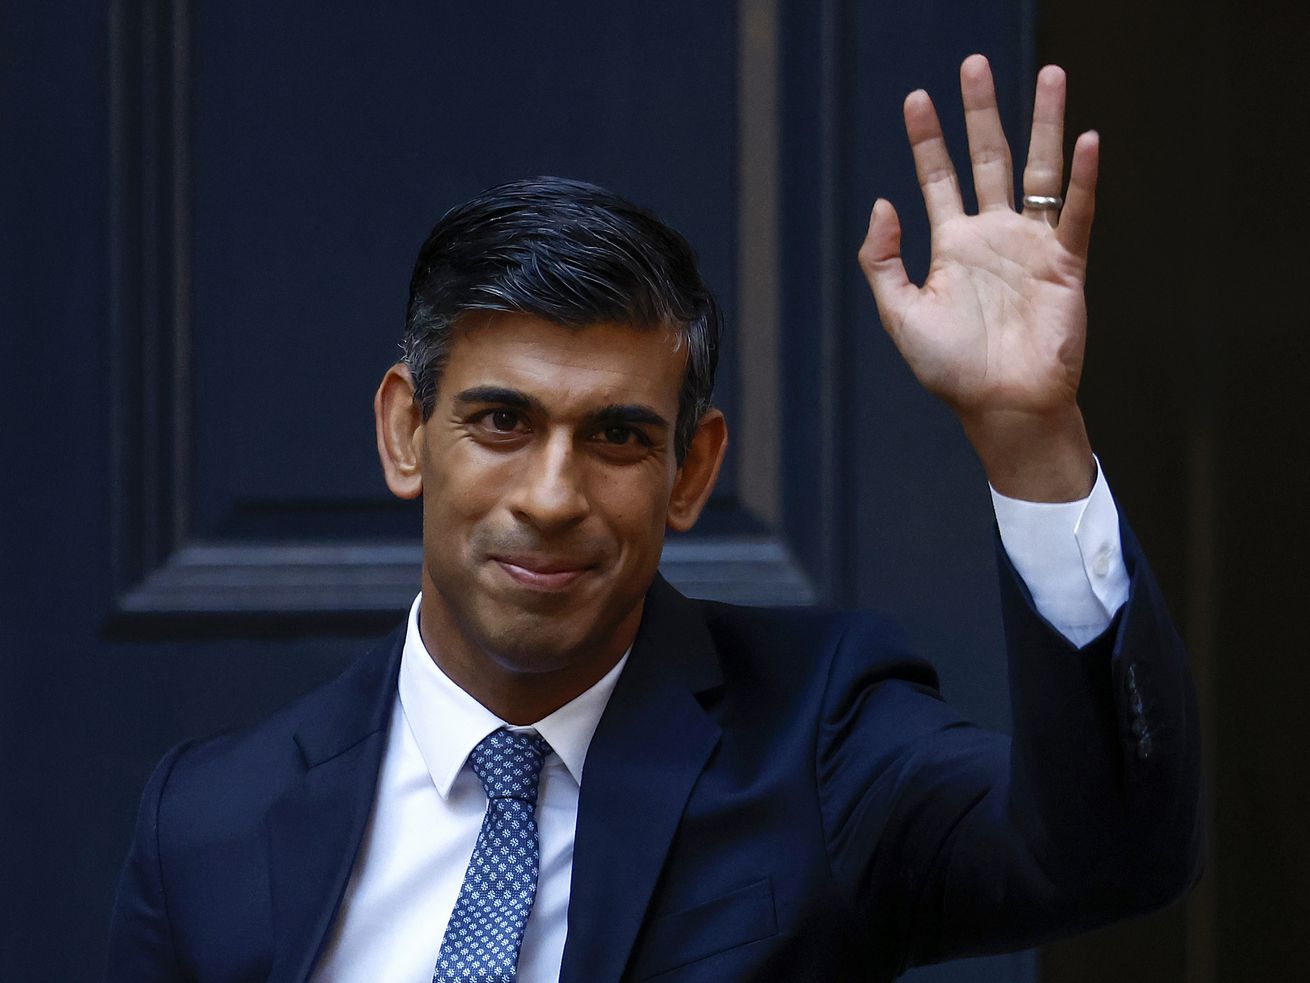 What we know about Rishi Sunak and how he might govern the UK